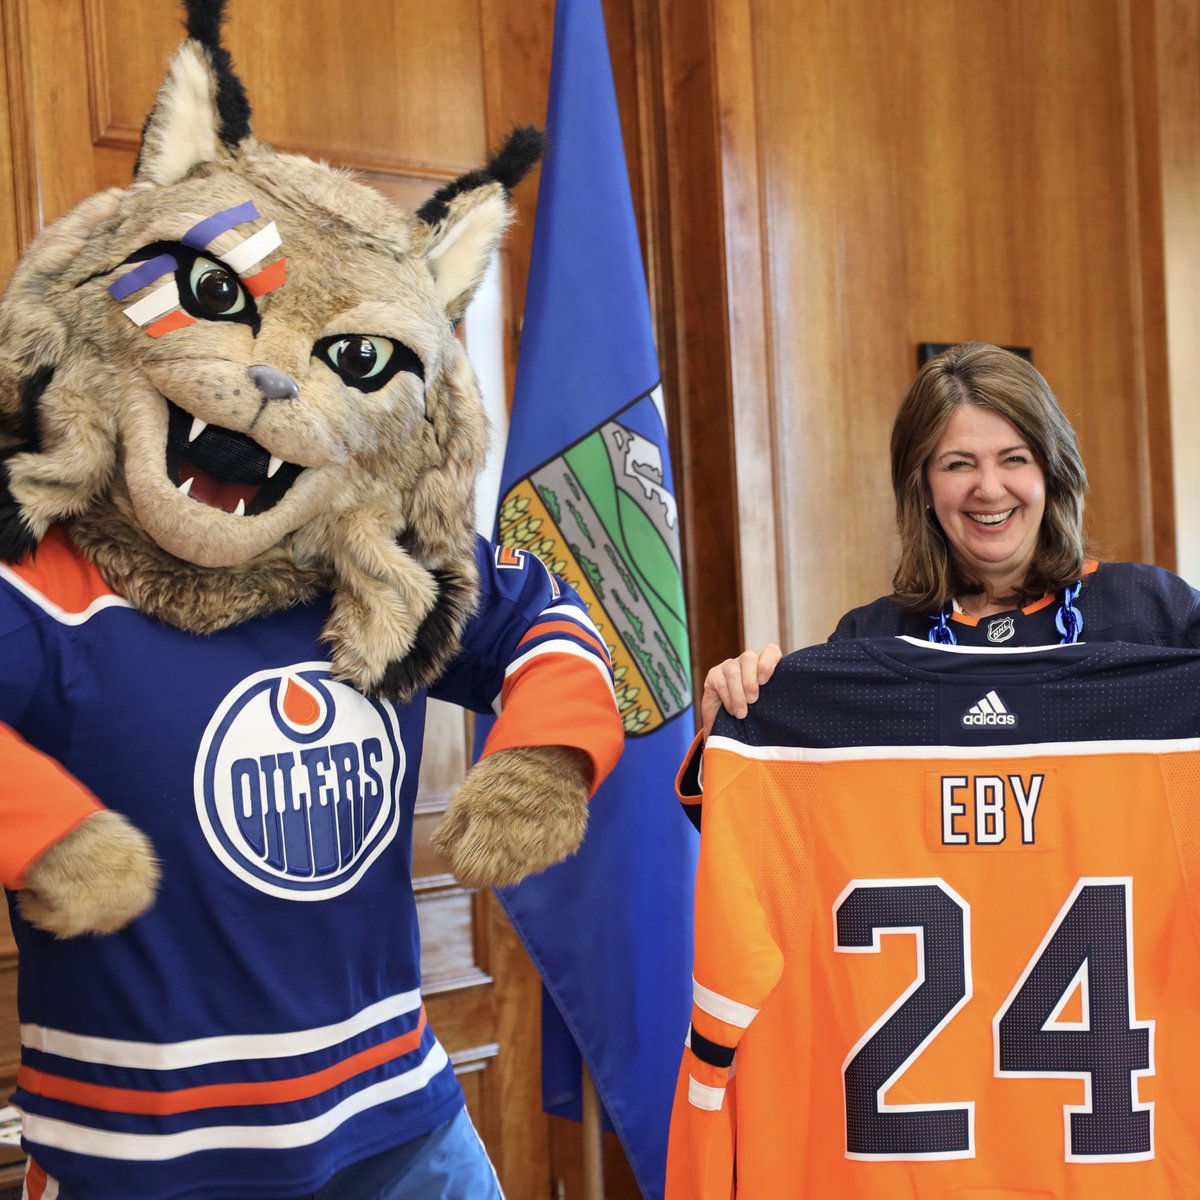 Hunter and I are ready for game 2 this Friday night! We even got a proper jersey ready for BC Premier @Dave_Eby… 🤭